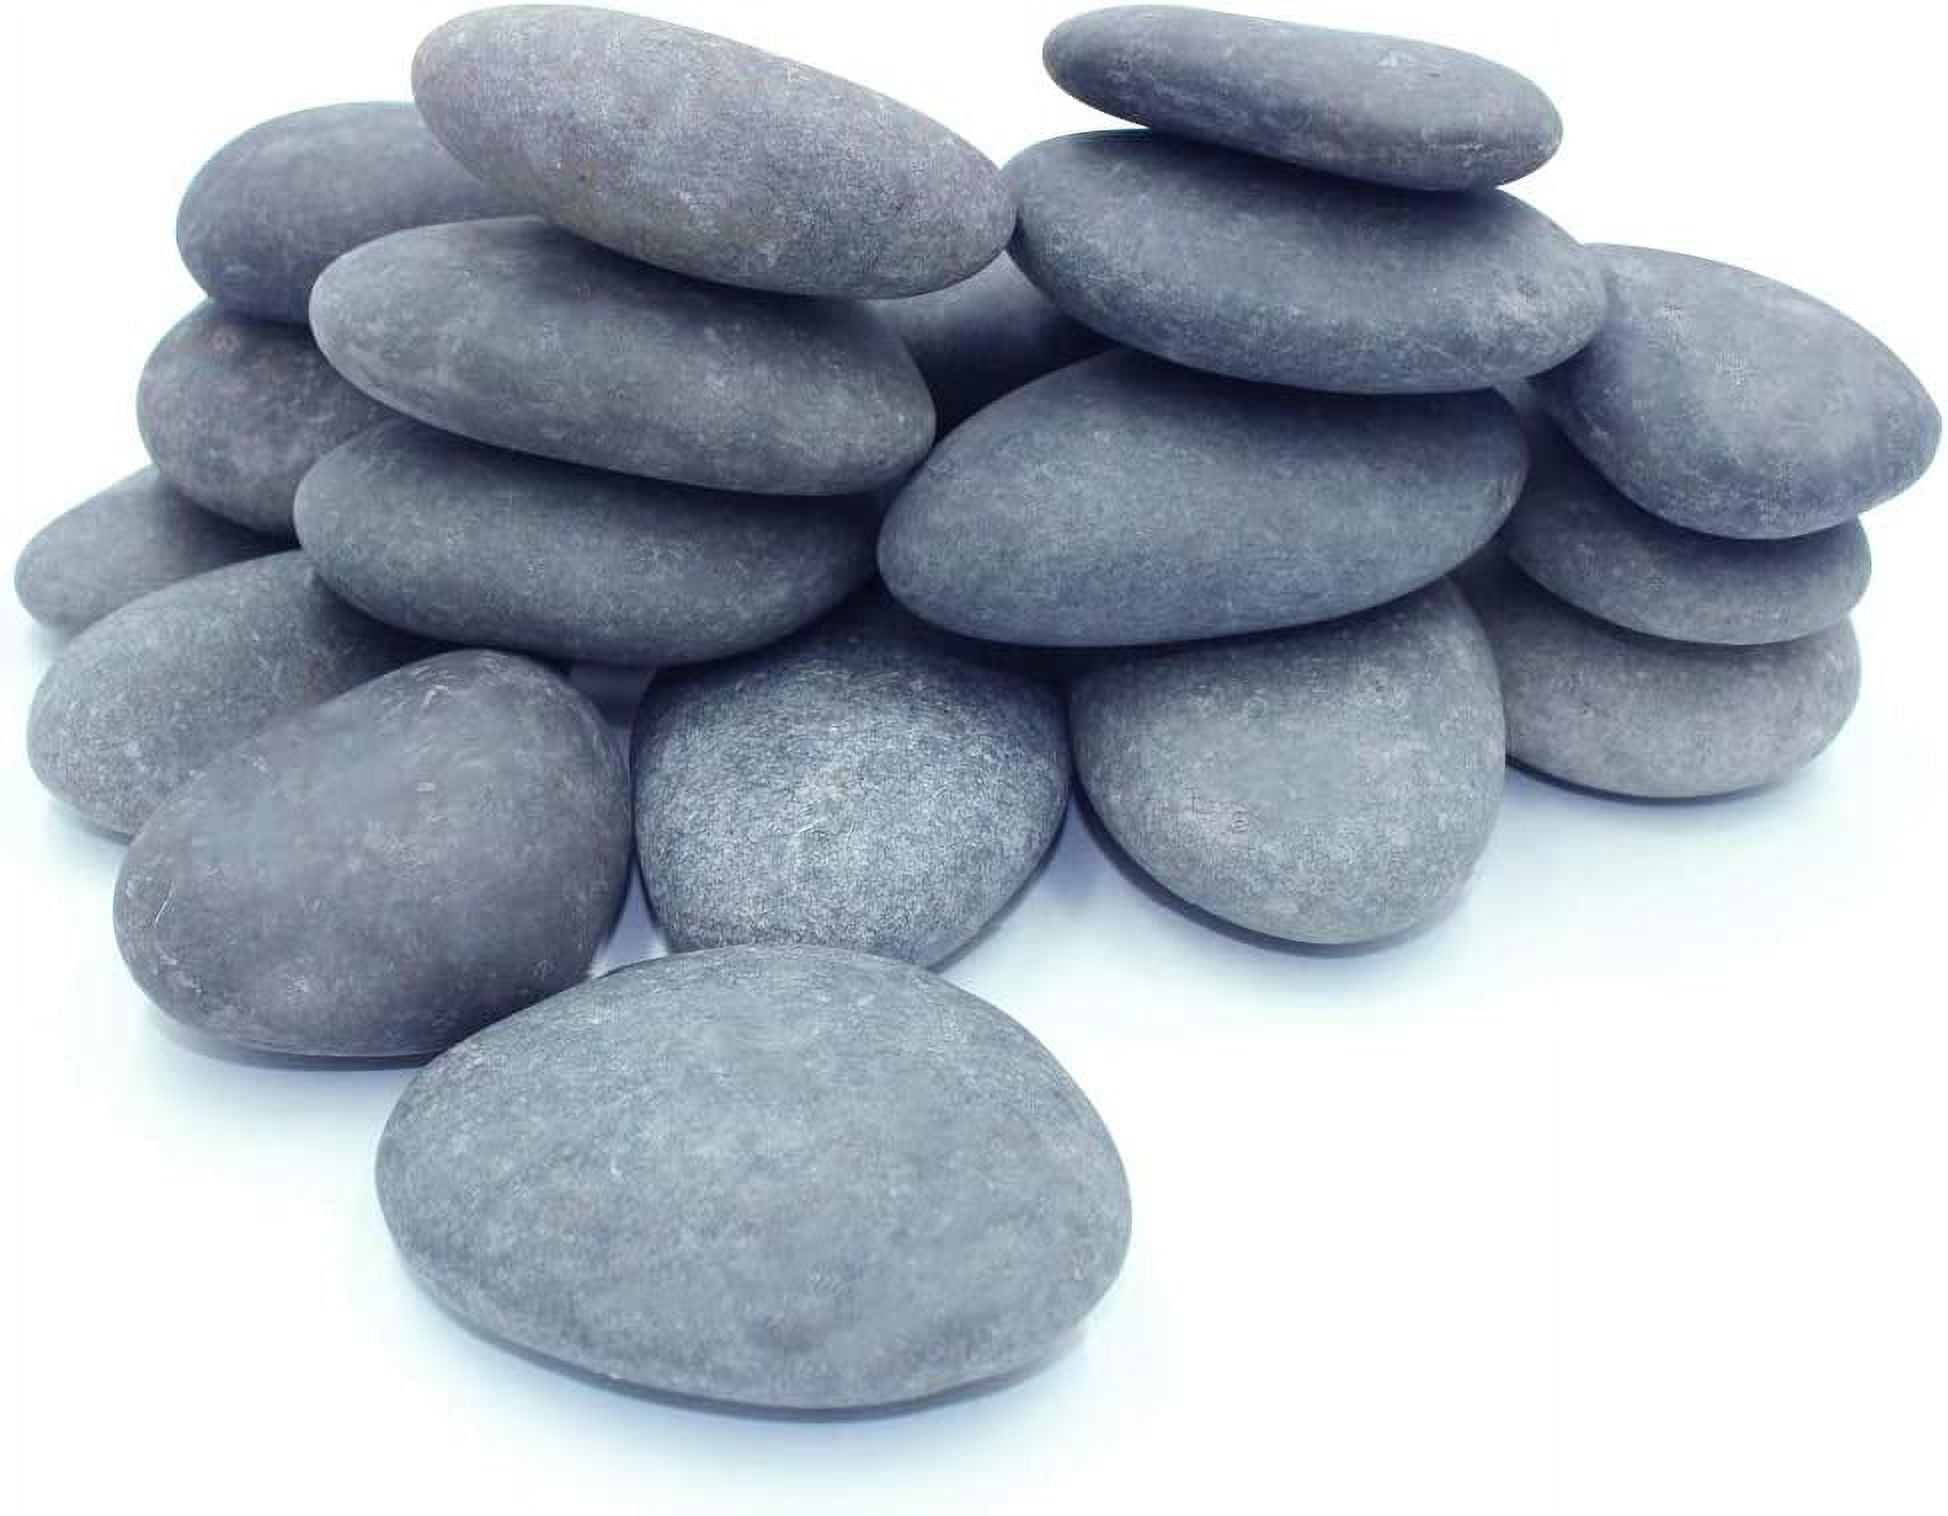 Ultra Large River Rocks for Painting – 20 Extra Big Rocks, 3.5” - 5” Inch  Flat Smooth Stones, 12-14 LB. of Craft Rocks for Rock Painting, Kindness